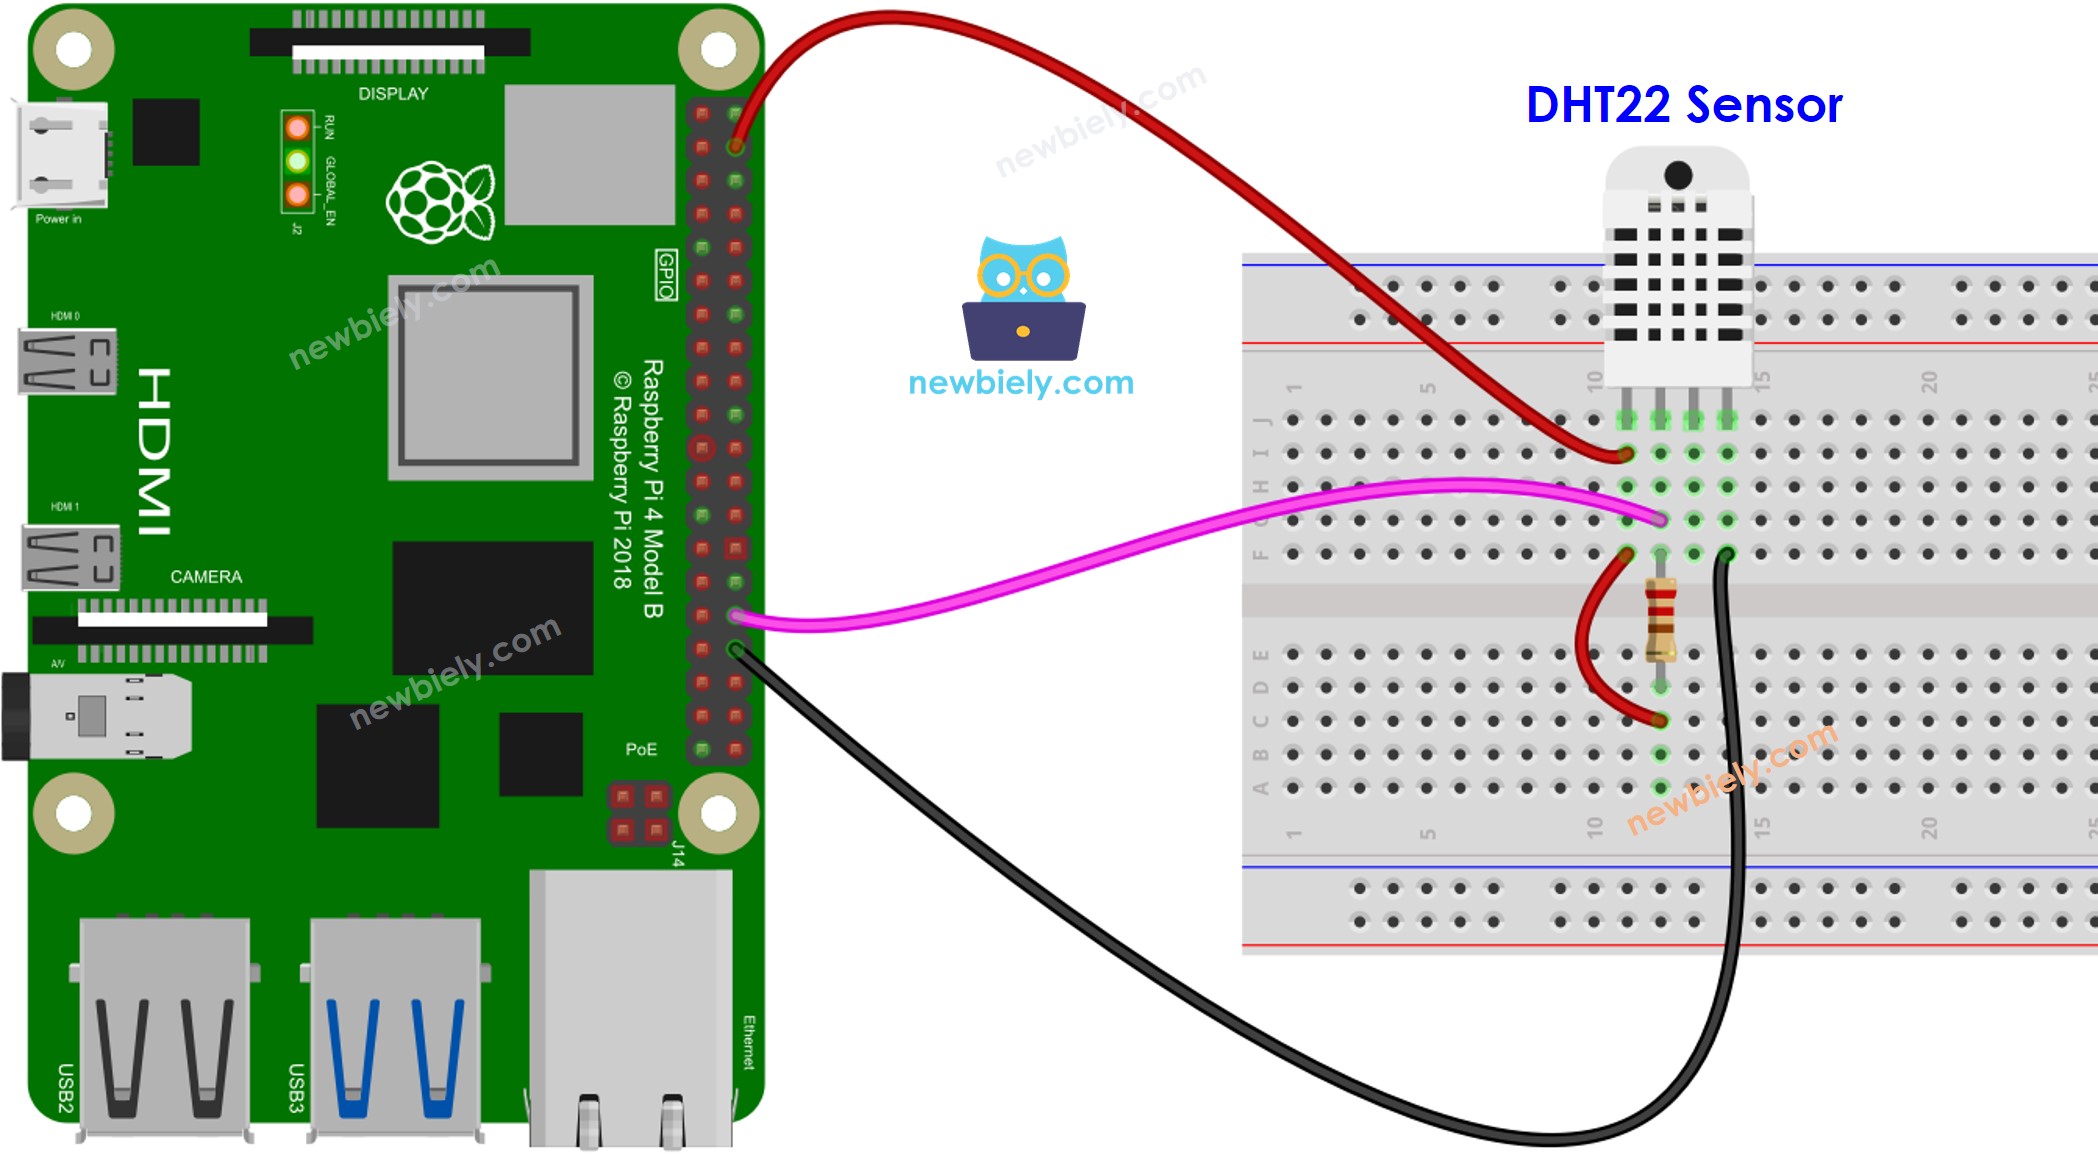 The wiring diagram between Raspberry Pi and DHT22 Temperature and humidity Sensor